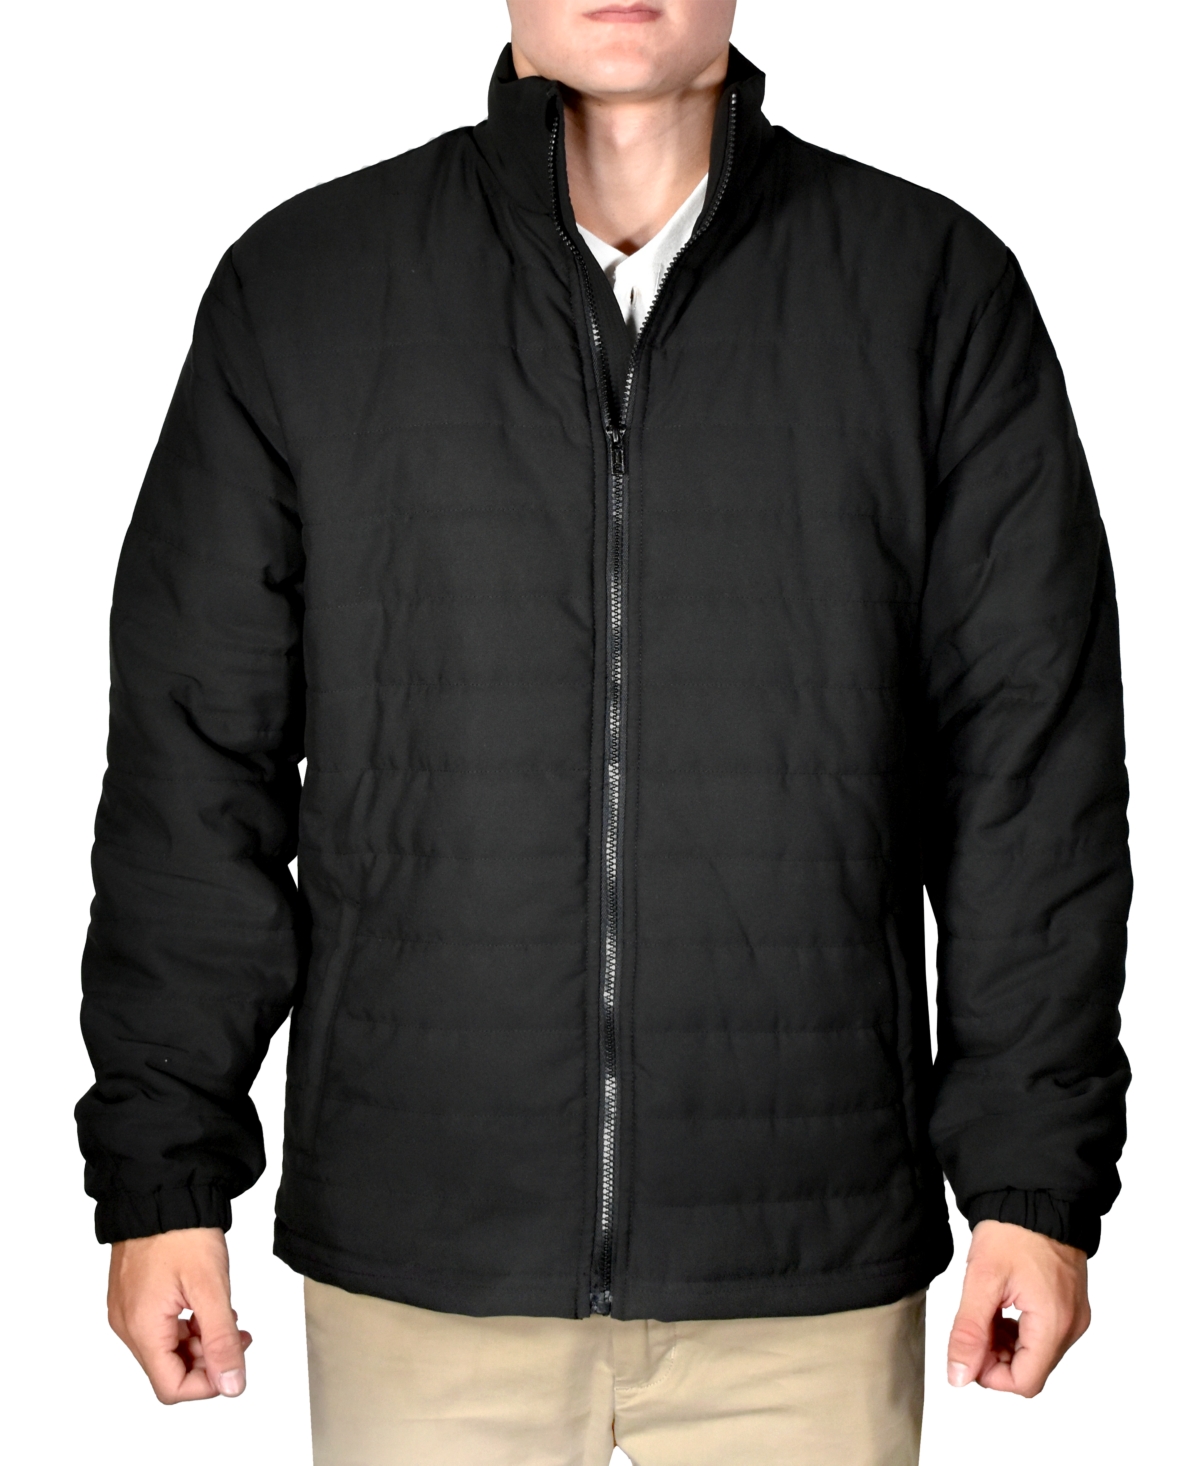 Men's Quilted Full-Zip Stand-Collar Puffy Jacket - Olive